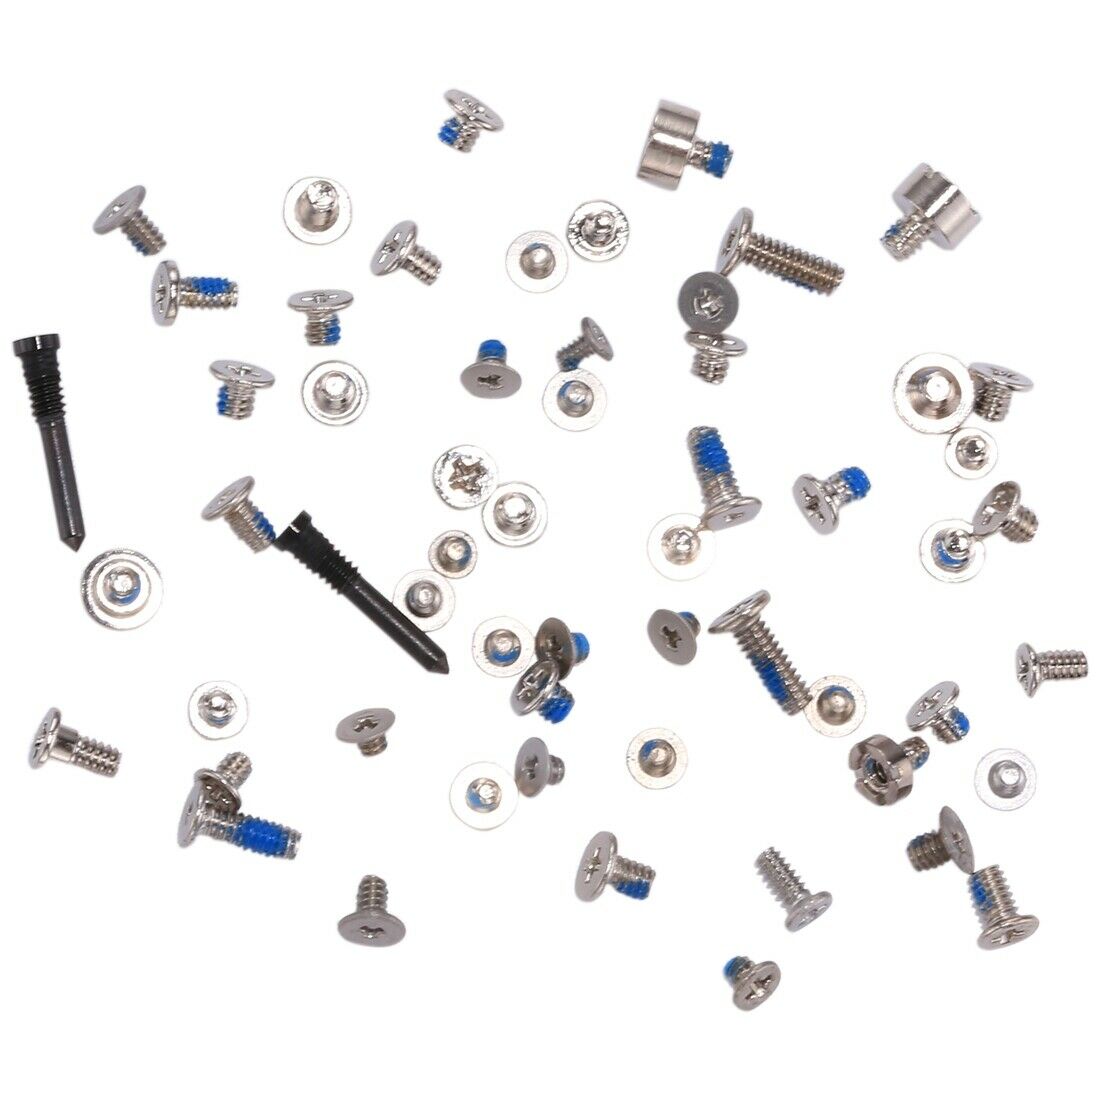 Apple iPhone X Full Screw Set including the 2 Black Bottom Screws for [product_price] - First Help Tech